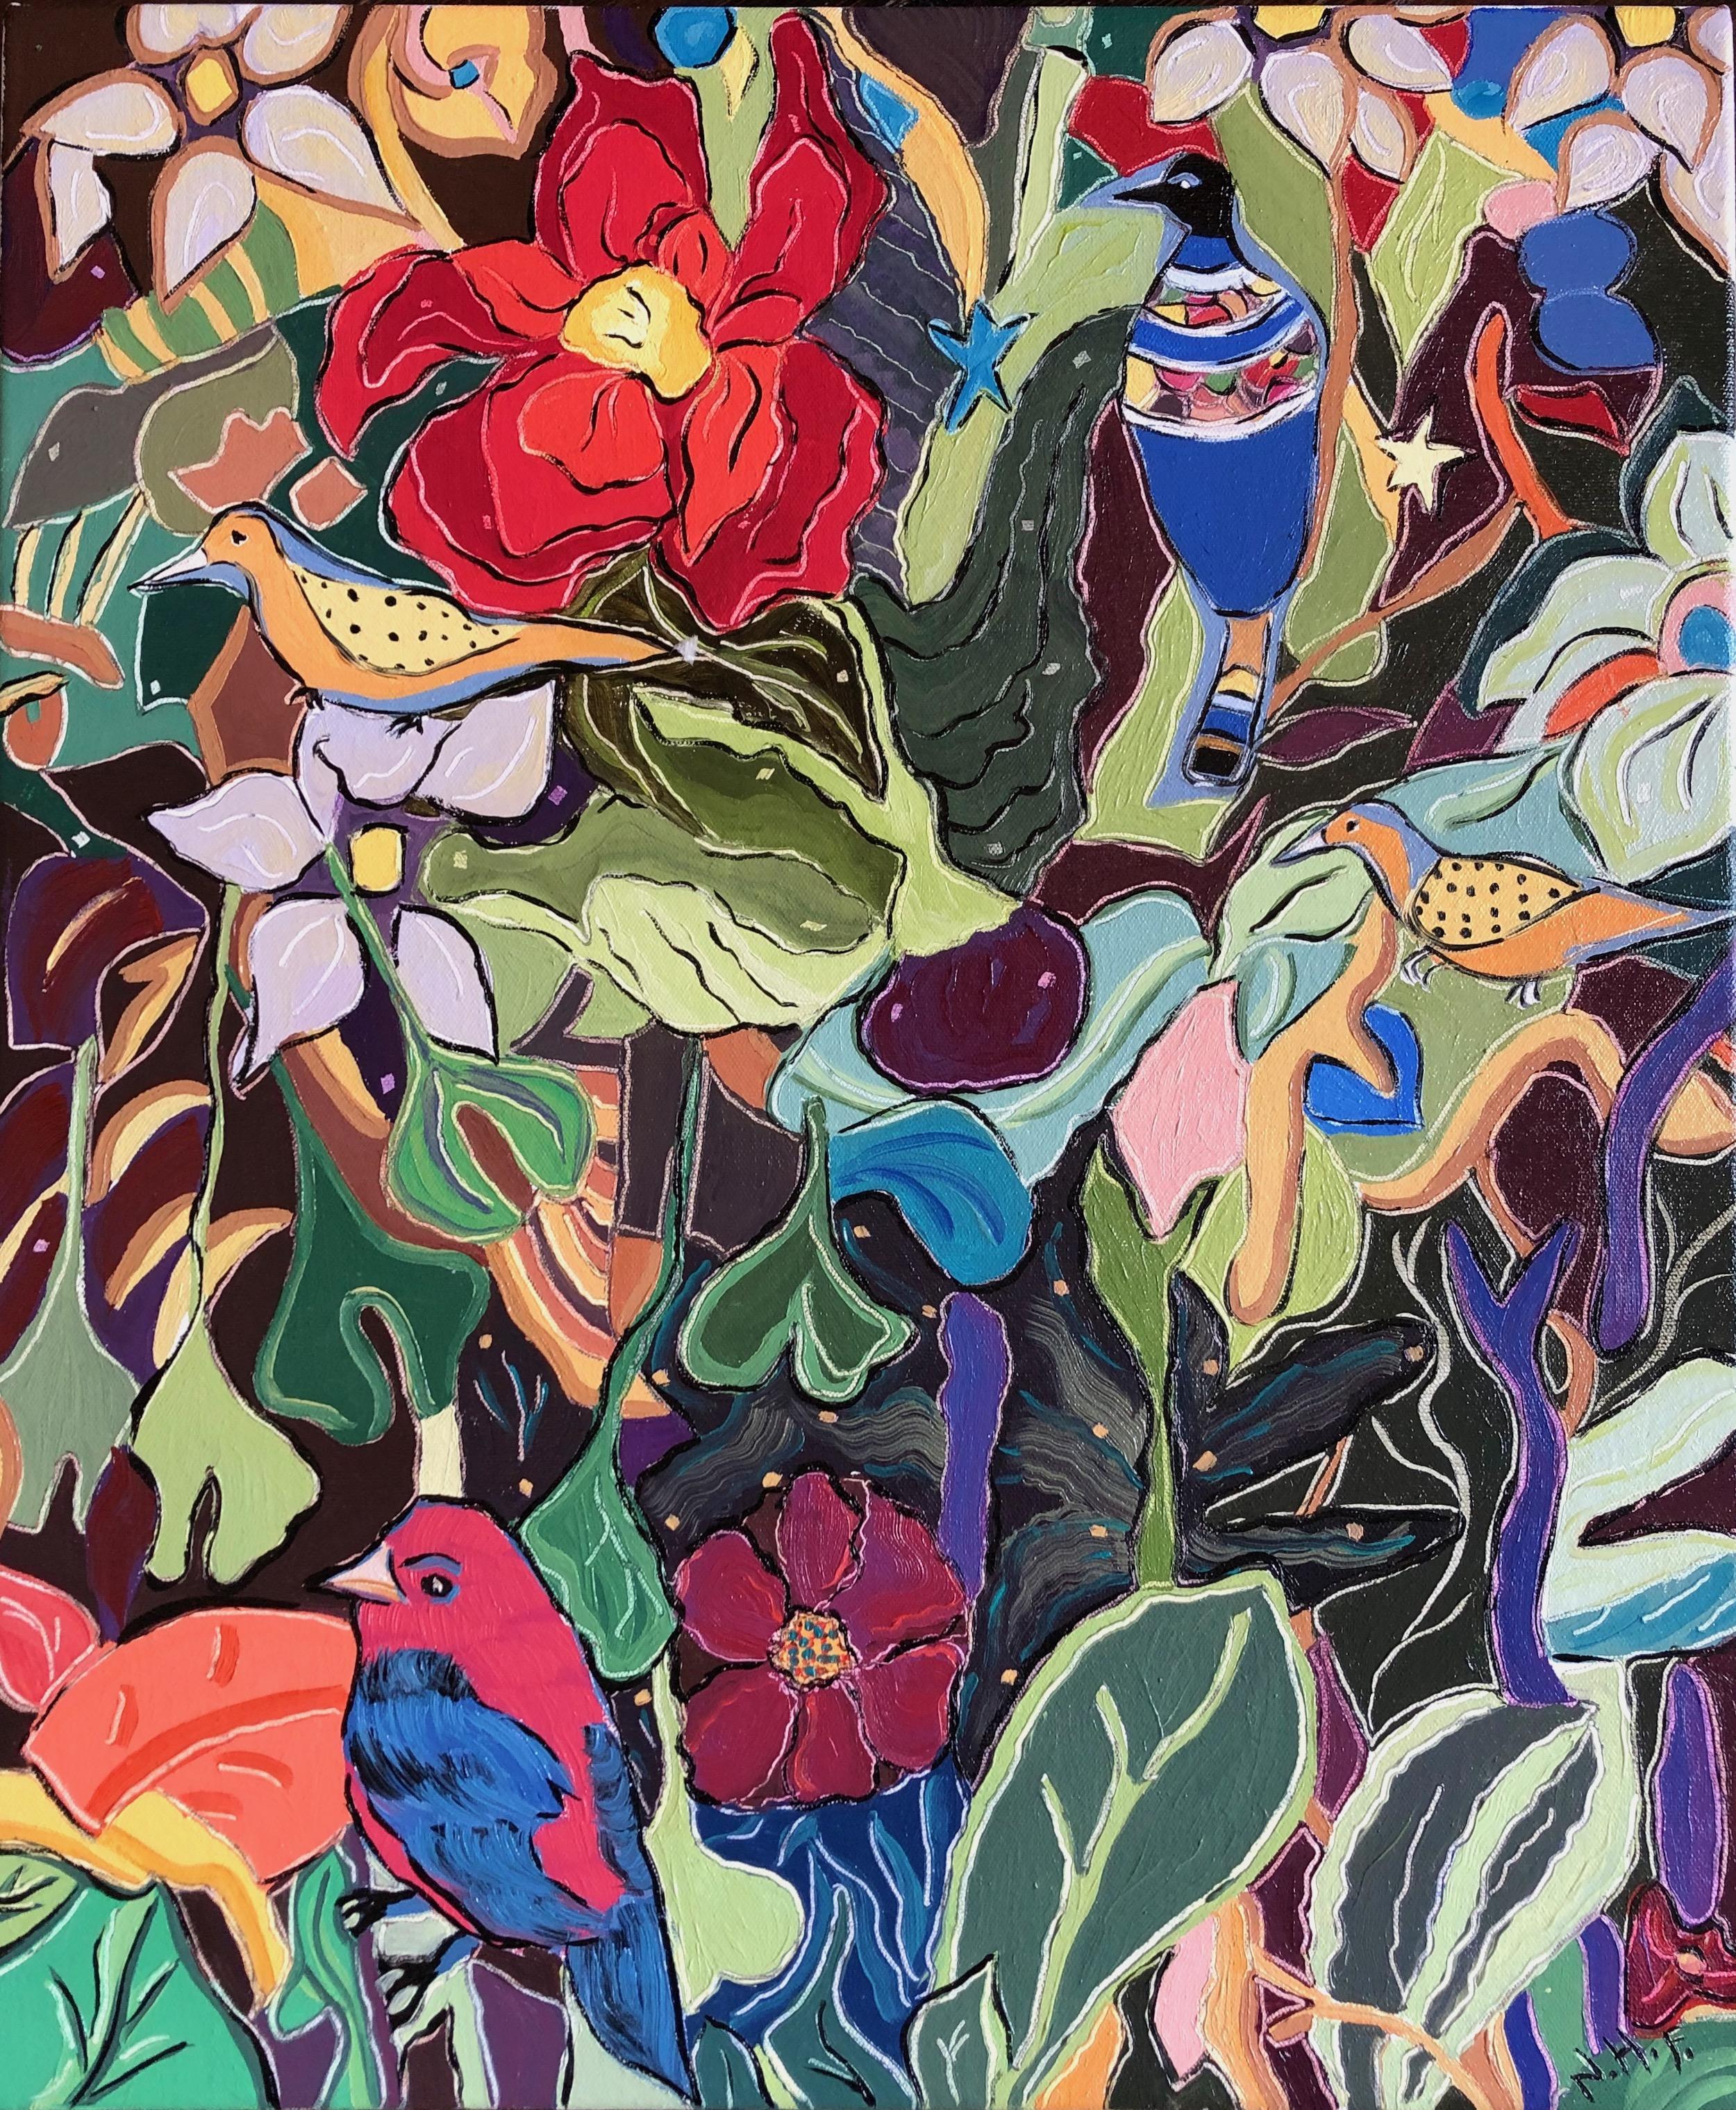 "A Strange Song", oil painting, jungle, birds, flowers, reds, greens, blues - Painting by Nan Hass Feldman